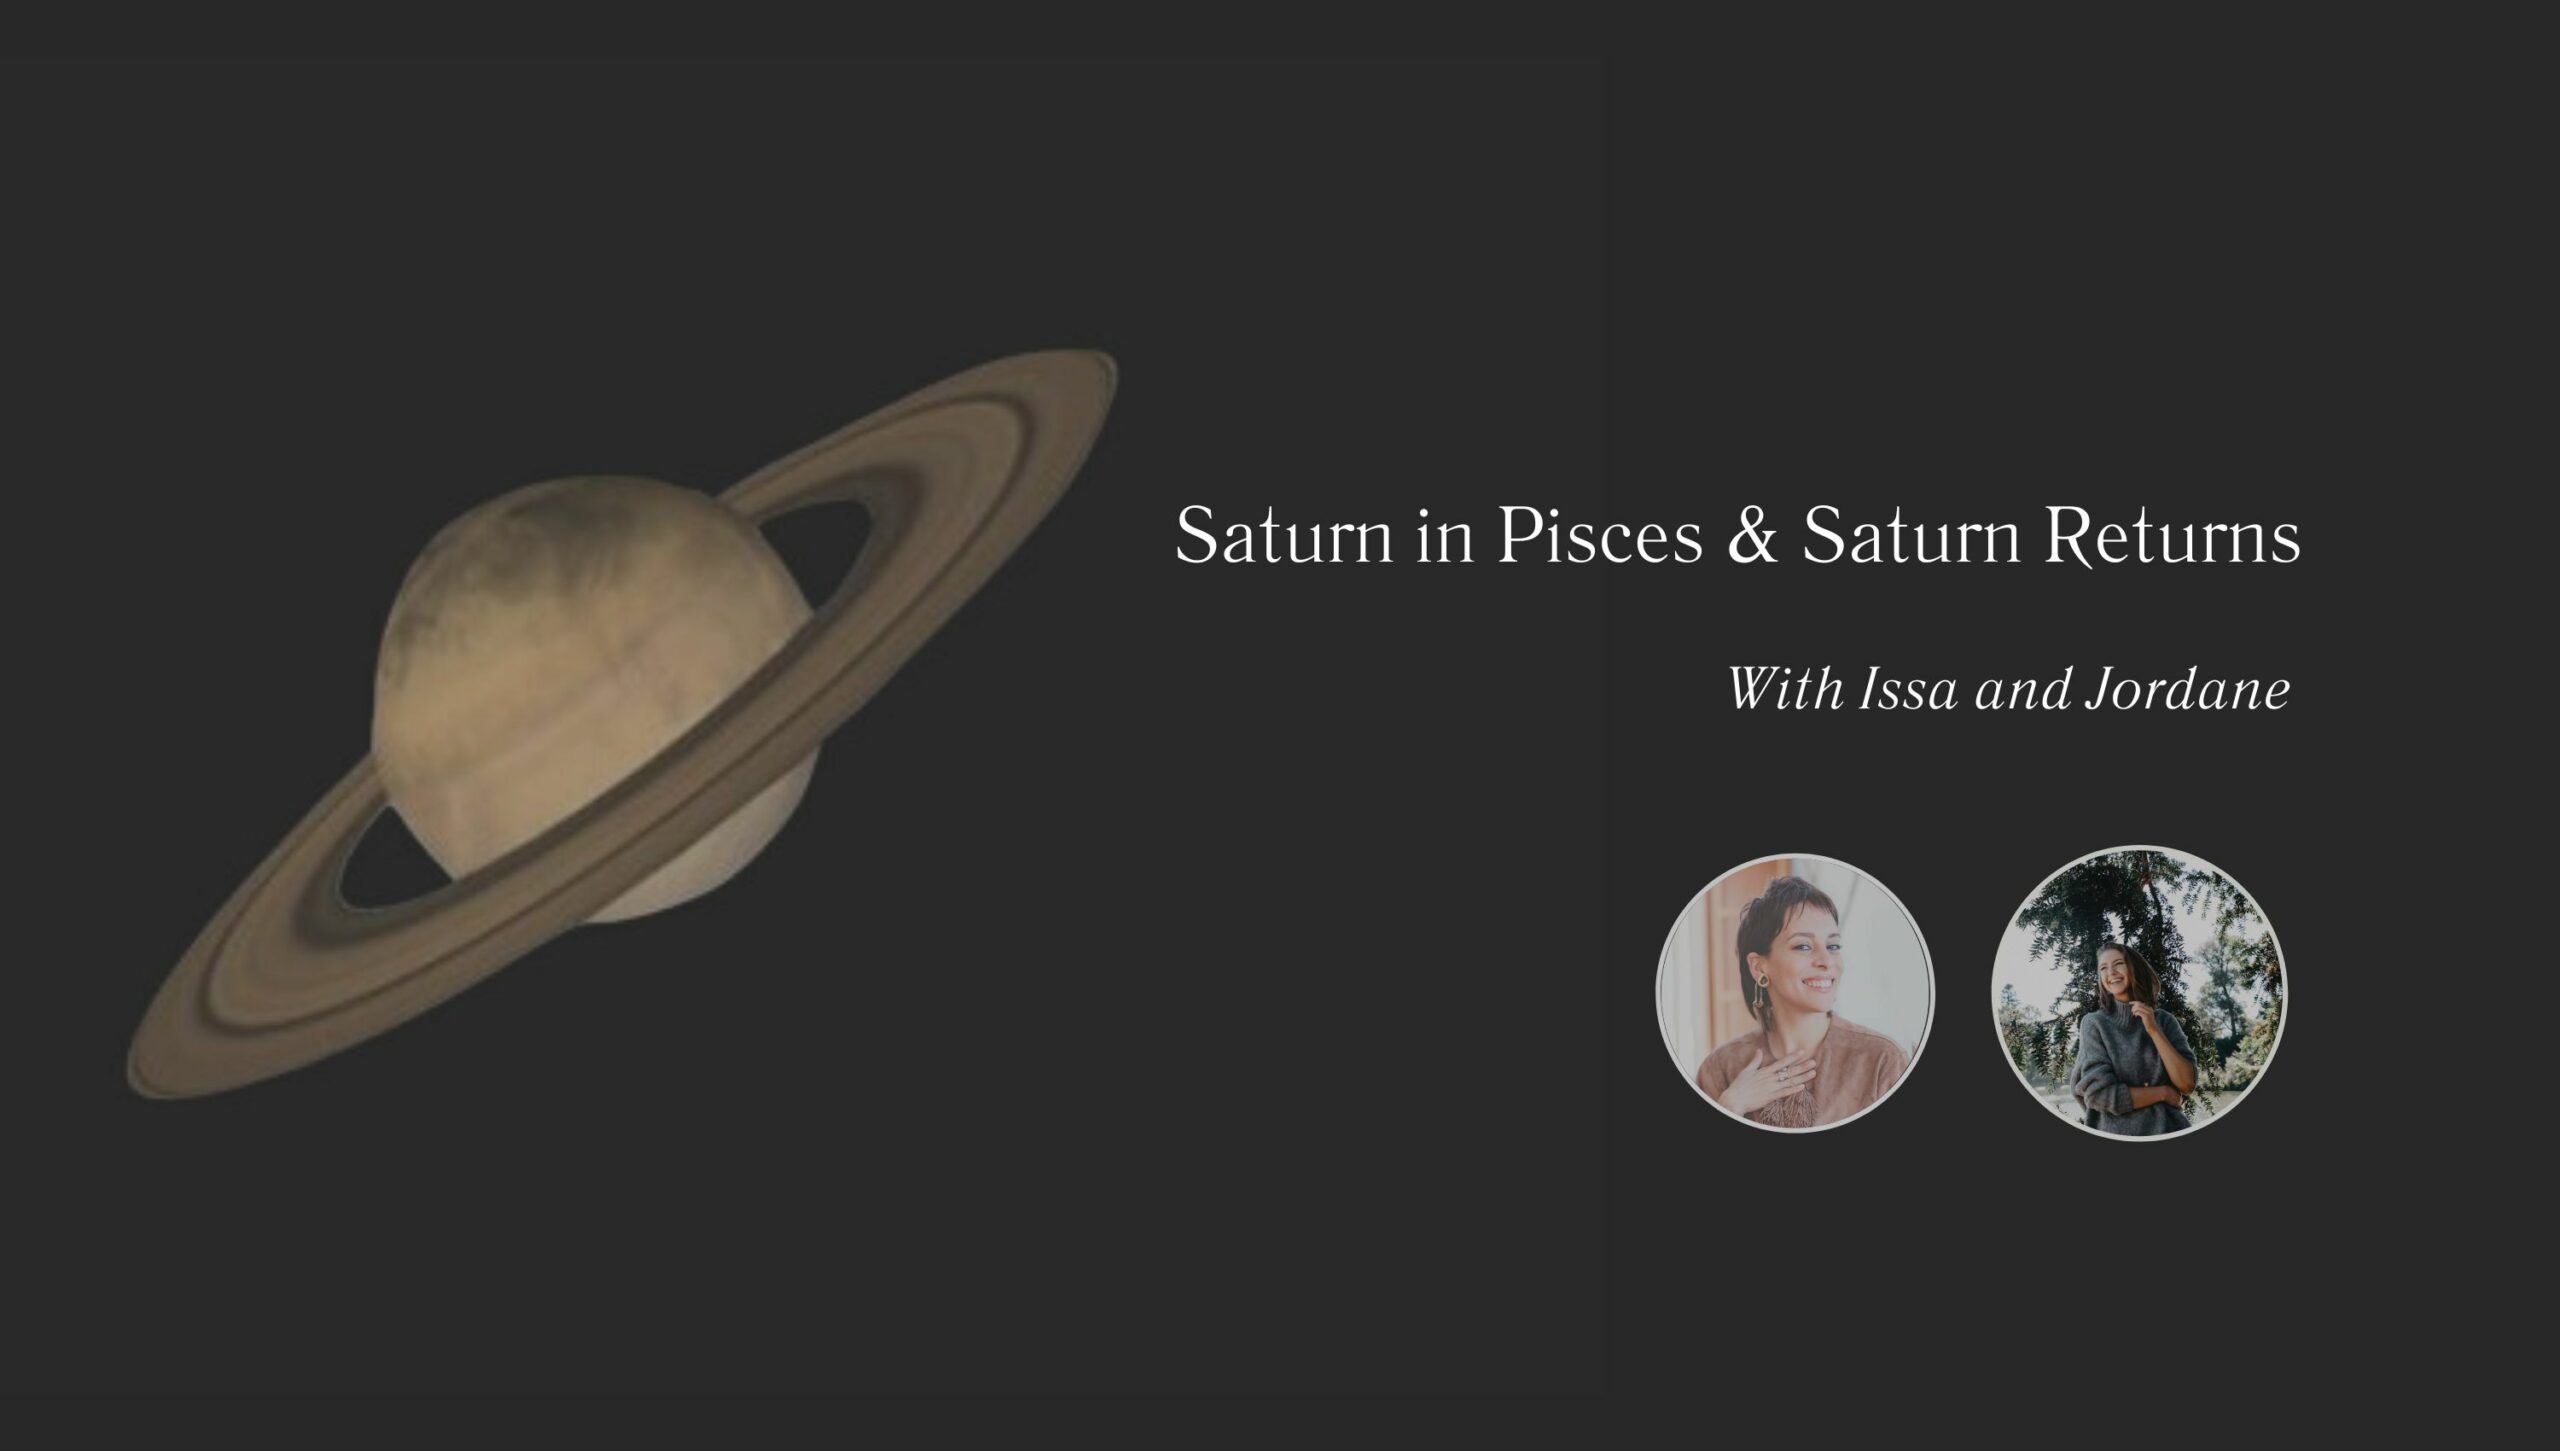 Saturn in Pisces & Saturn Returns with Issa